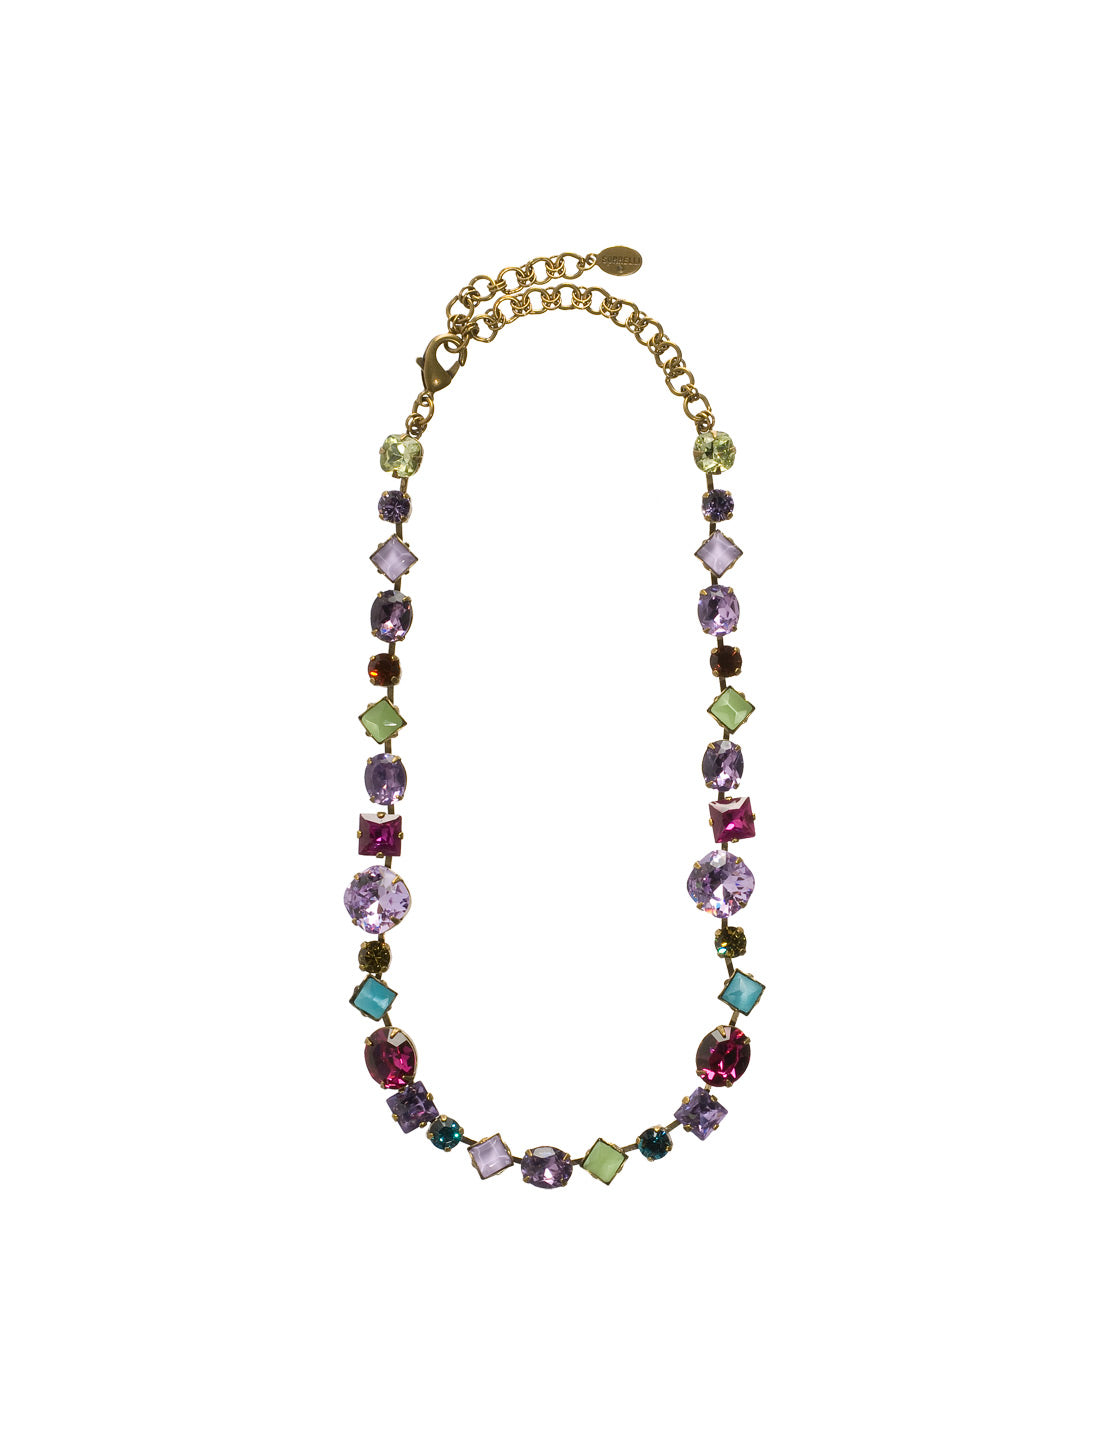 Bold Multi Shaped Large Crystal Necklace Classic Necklace - NBP3AGHAR - A classic Sorrelli style to make a statement or wear everyday. From Sorrelli's Harmony collection in our Antique Gold-tone finish.